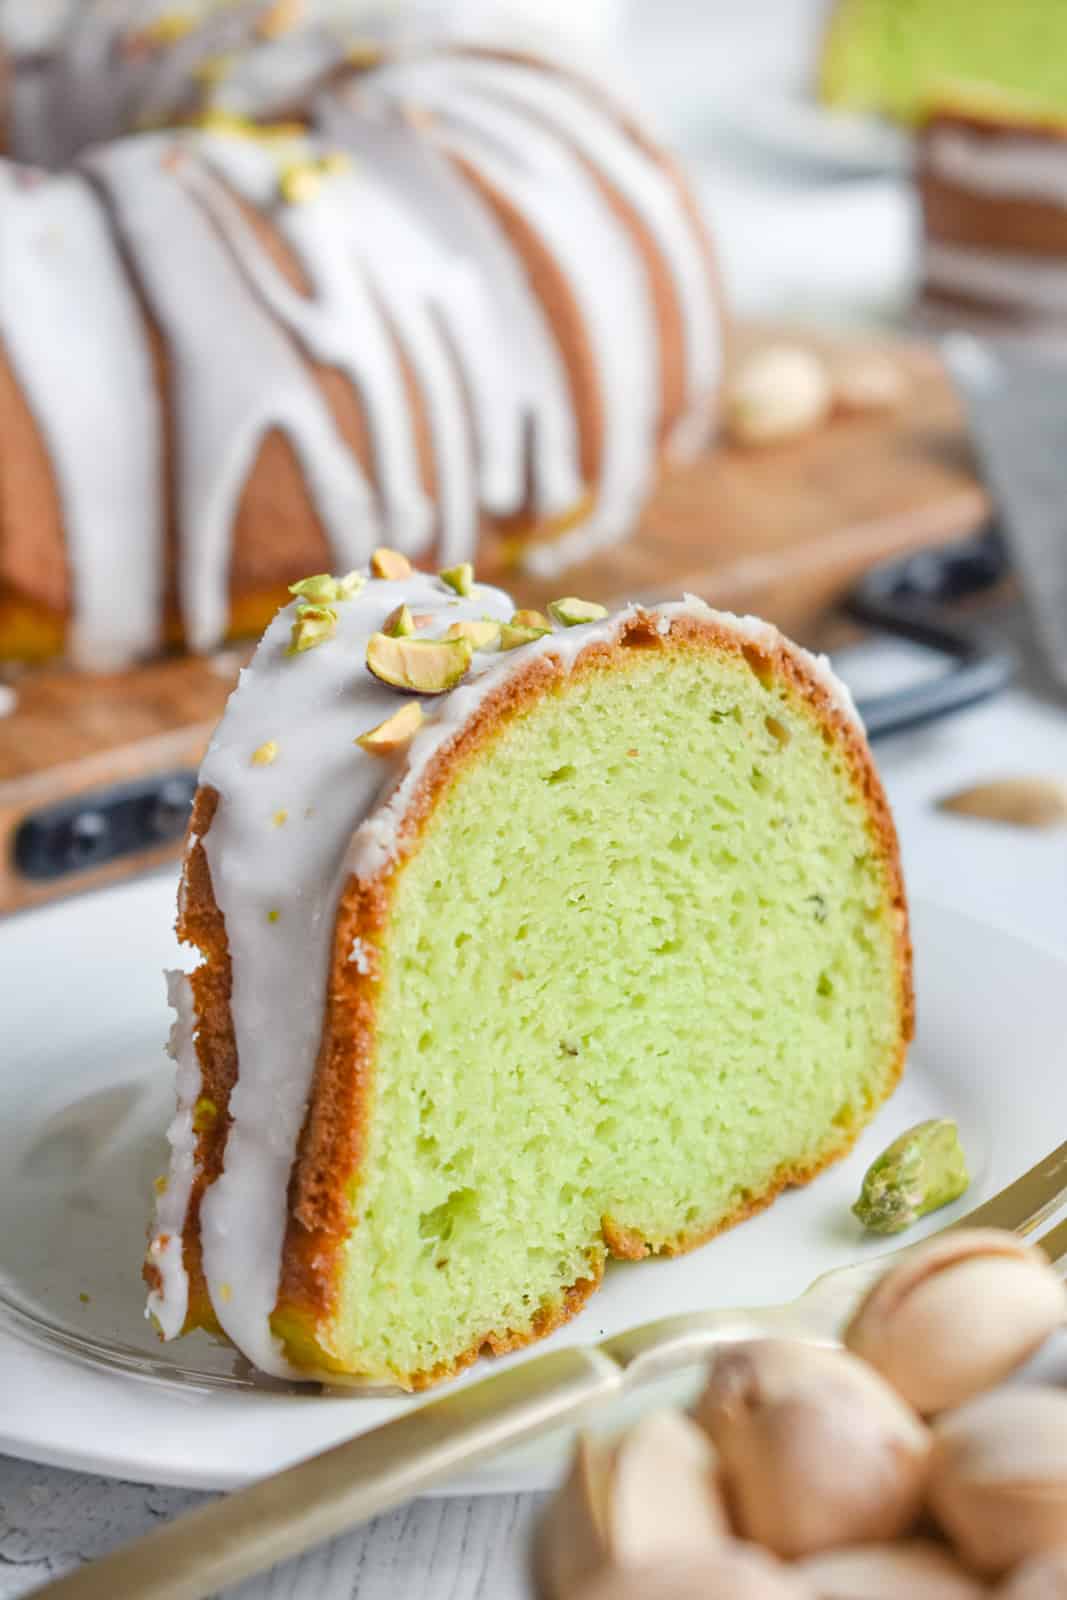 One slice of Pistachio Cake on white plate with cake in background